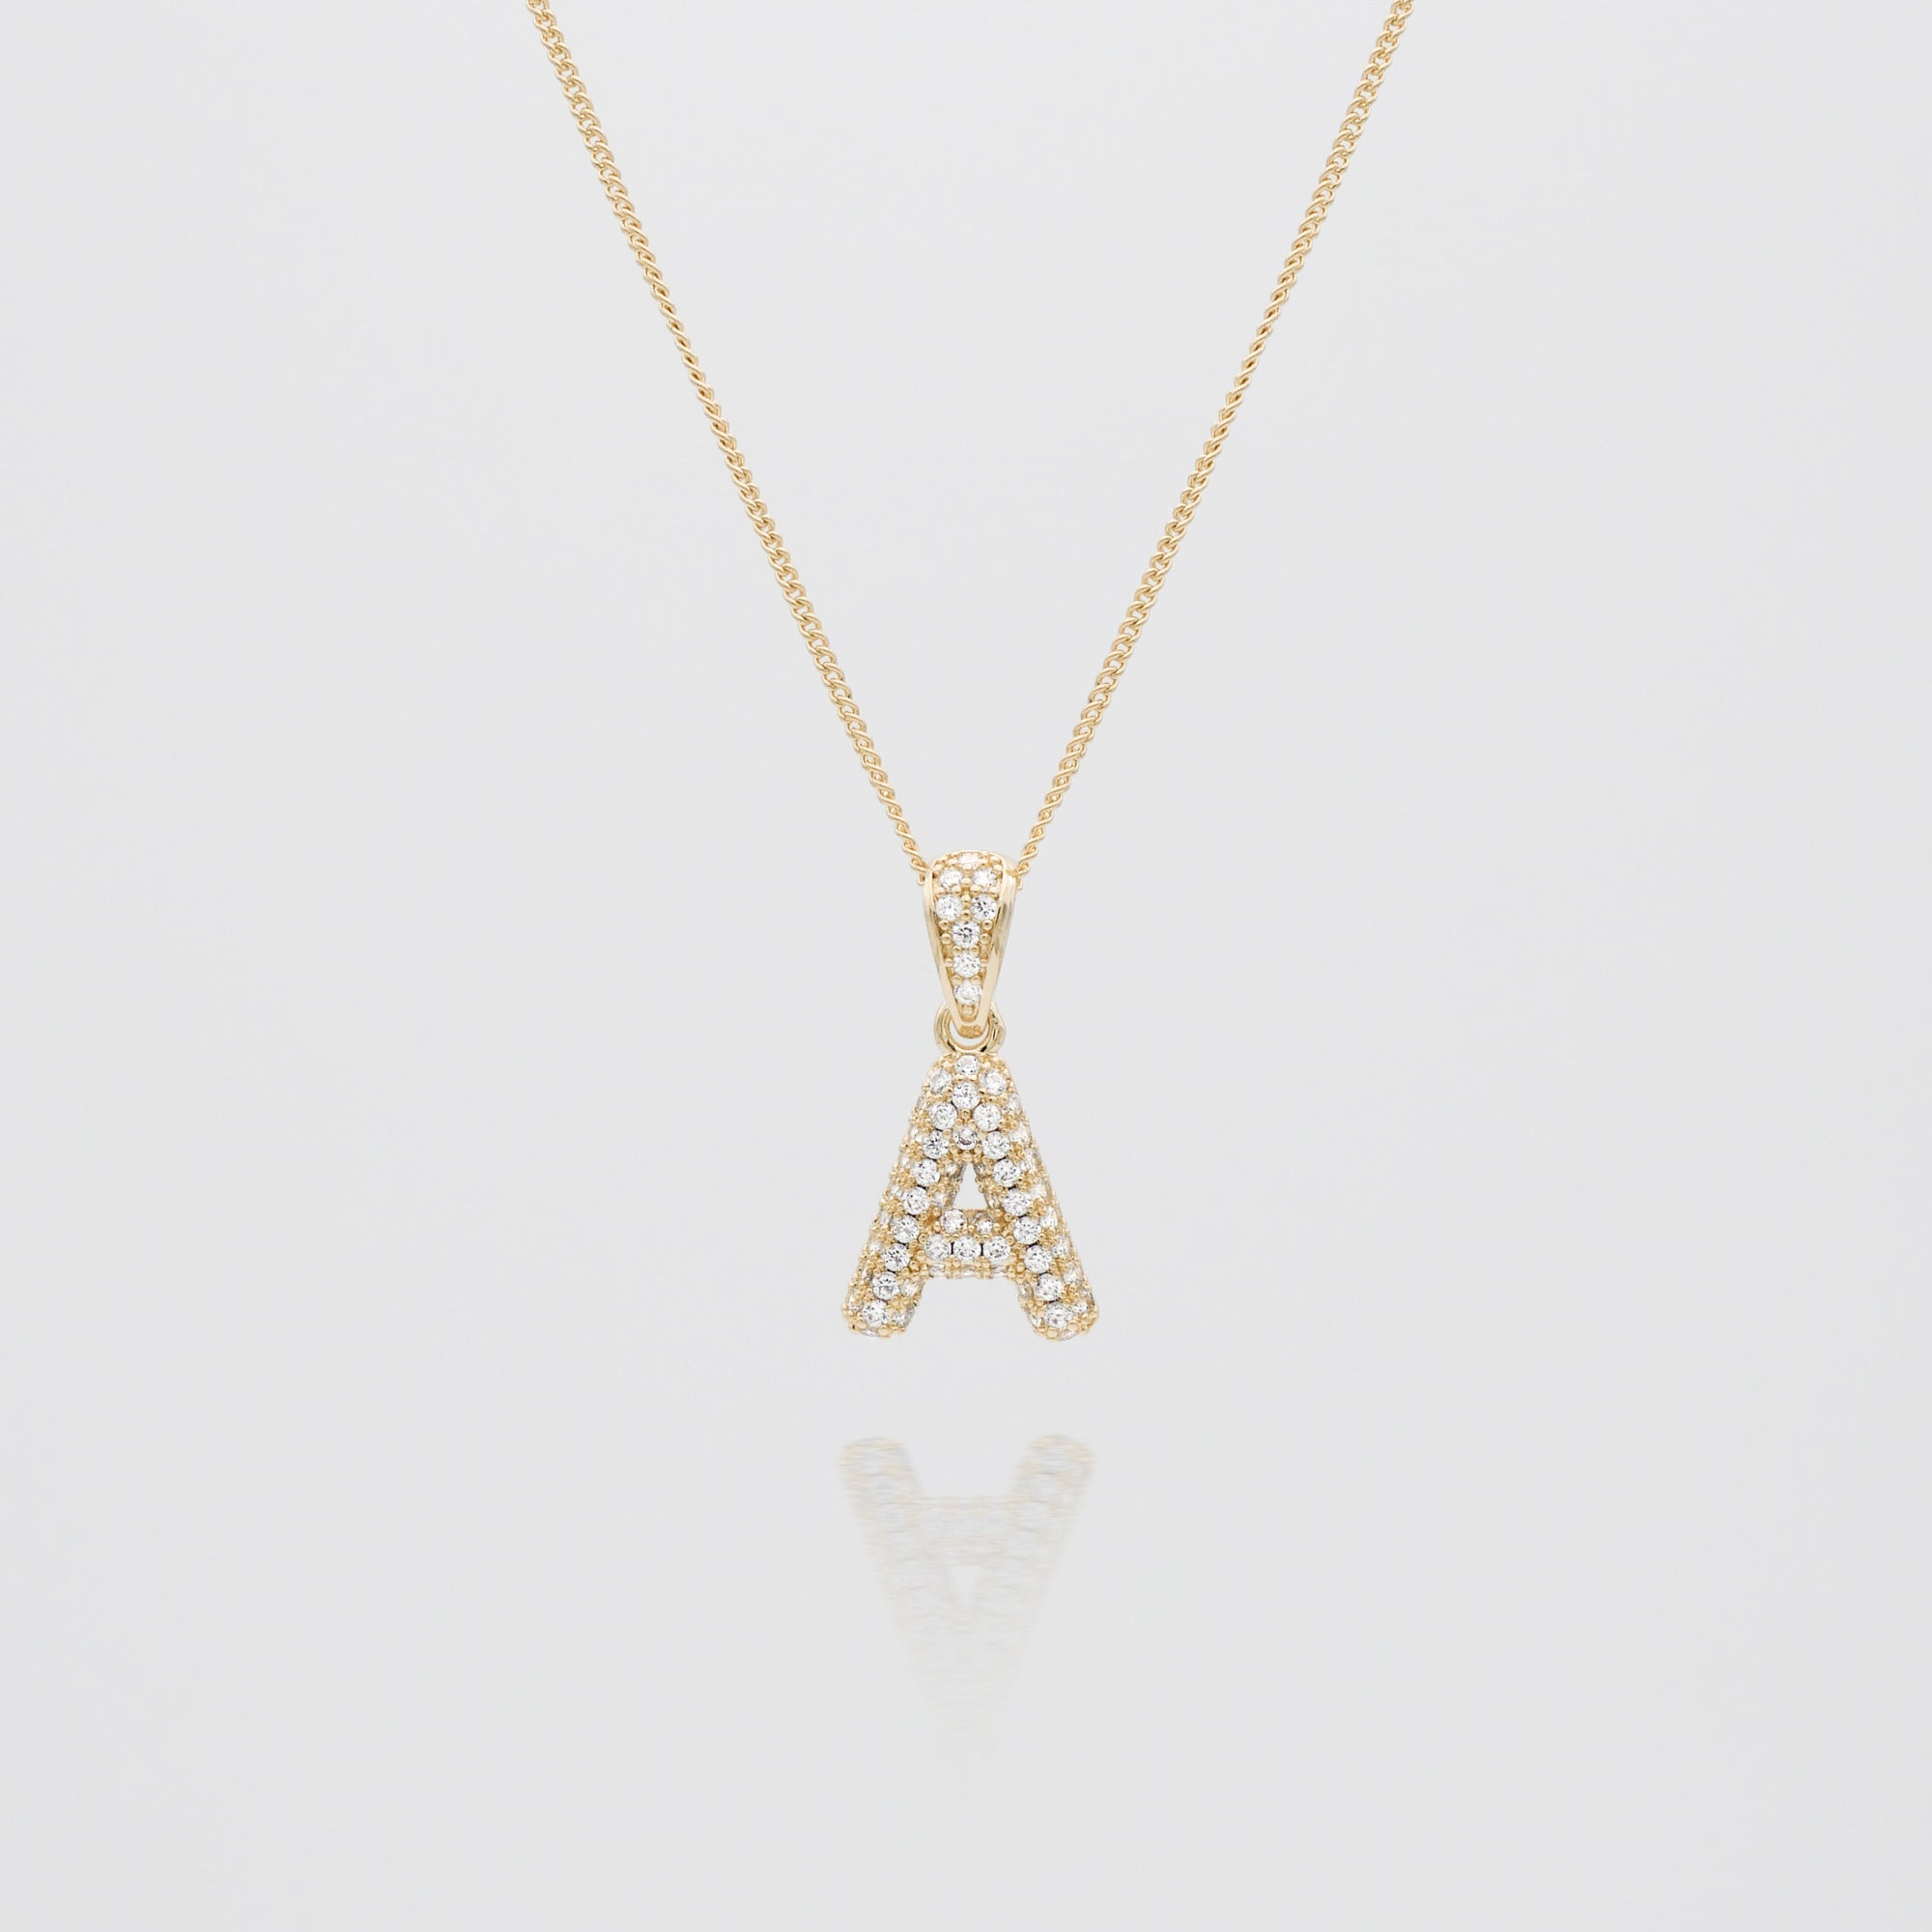 ICY Mini Bubble Initial Necklace